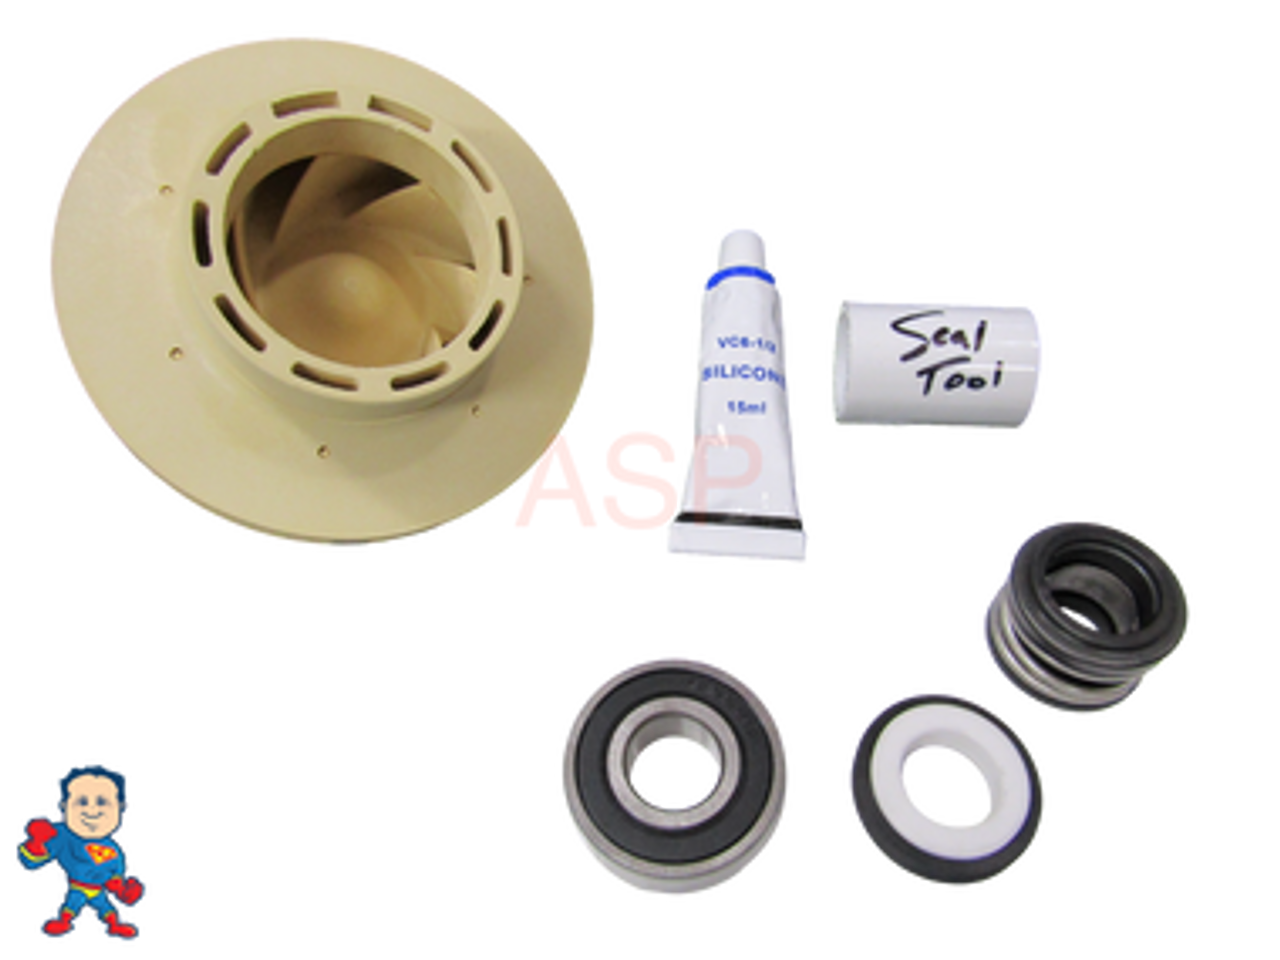 Spa Hot Tub Pump 2.5HP Impeller & Seal Kit May 2009+ Jacuzzi® Premium or Sundance® Video How To This pump will have WUA400I WUA400-II and will also have one of these numbers on it. 6500-352, 6500-363, 6500-365, 6500-367